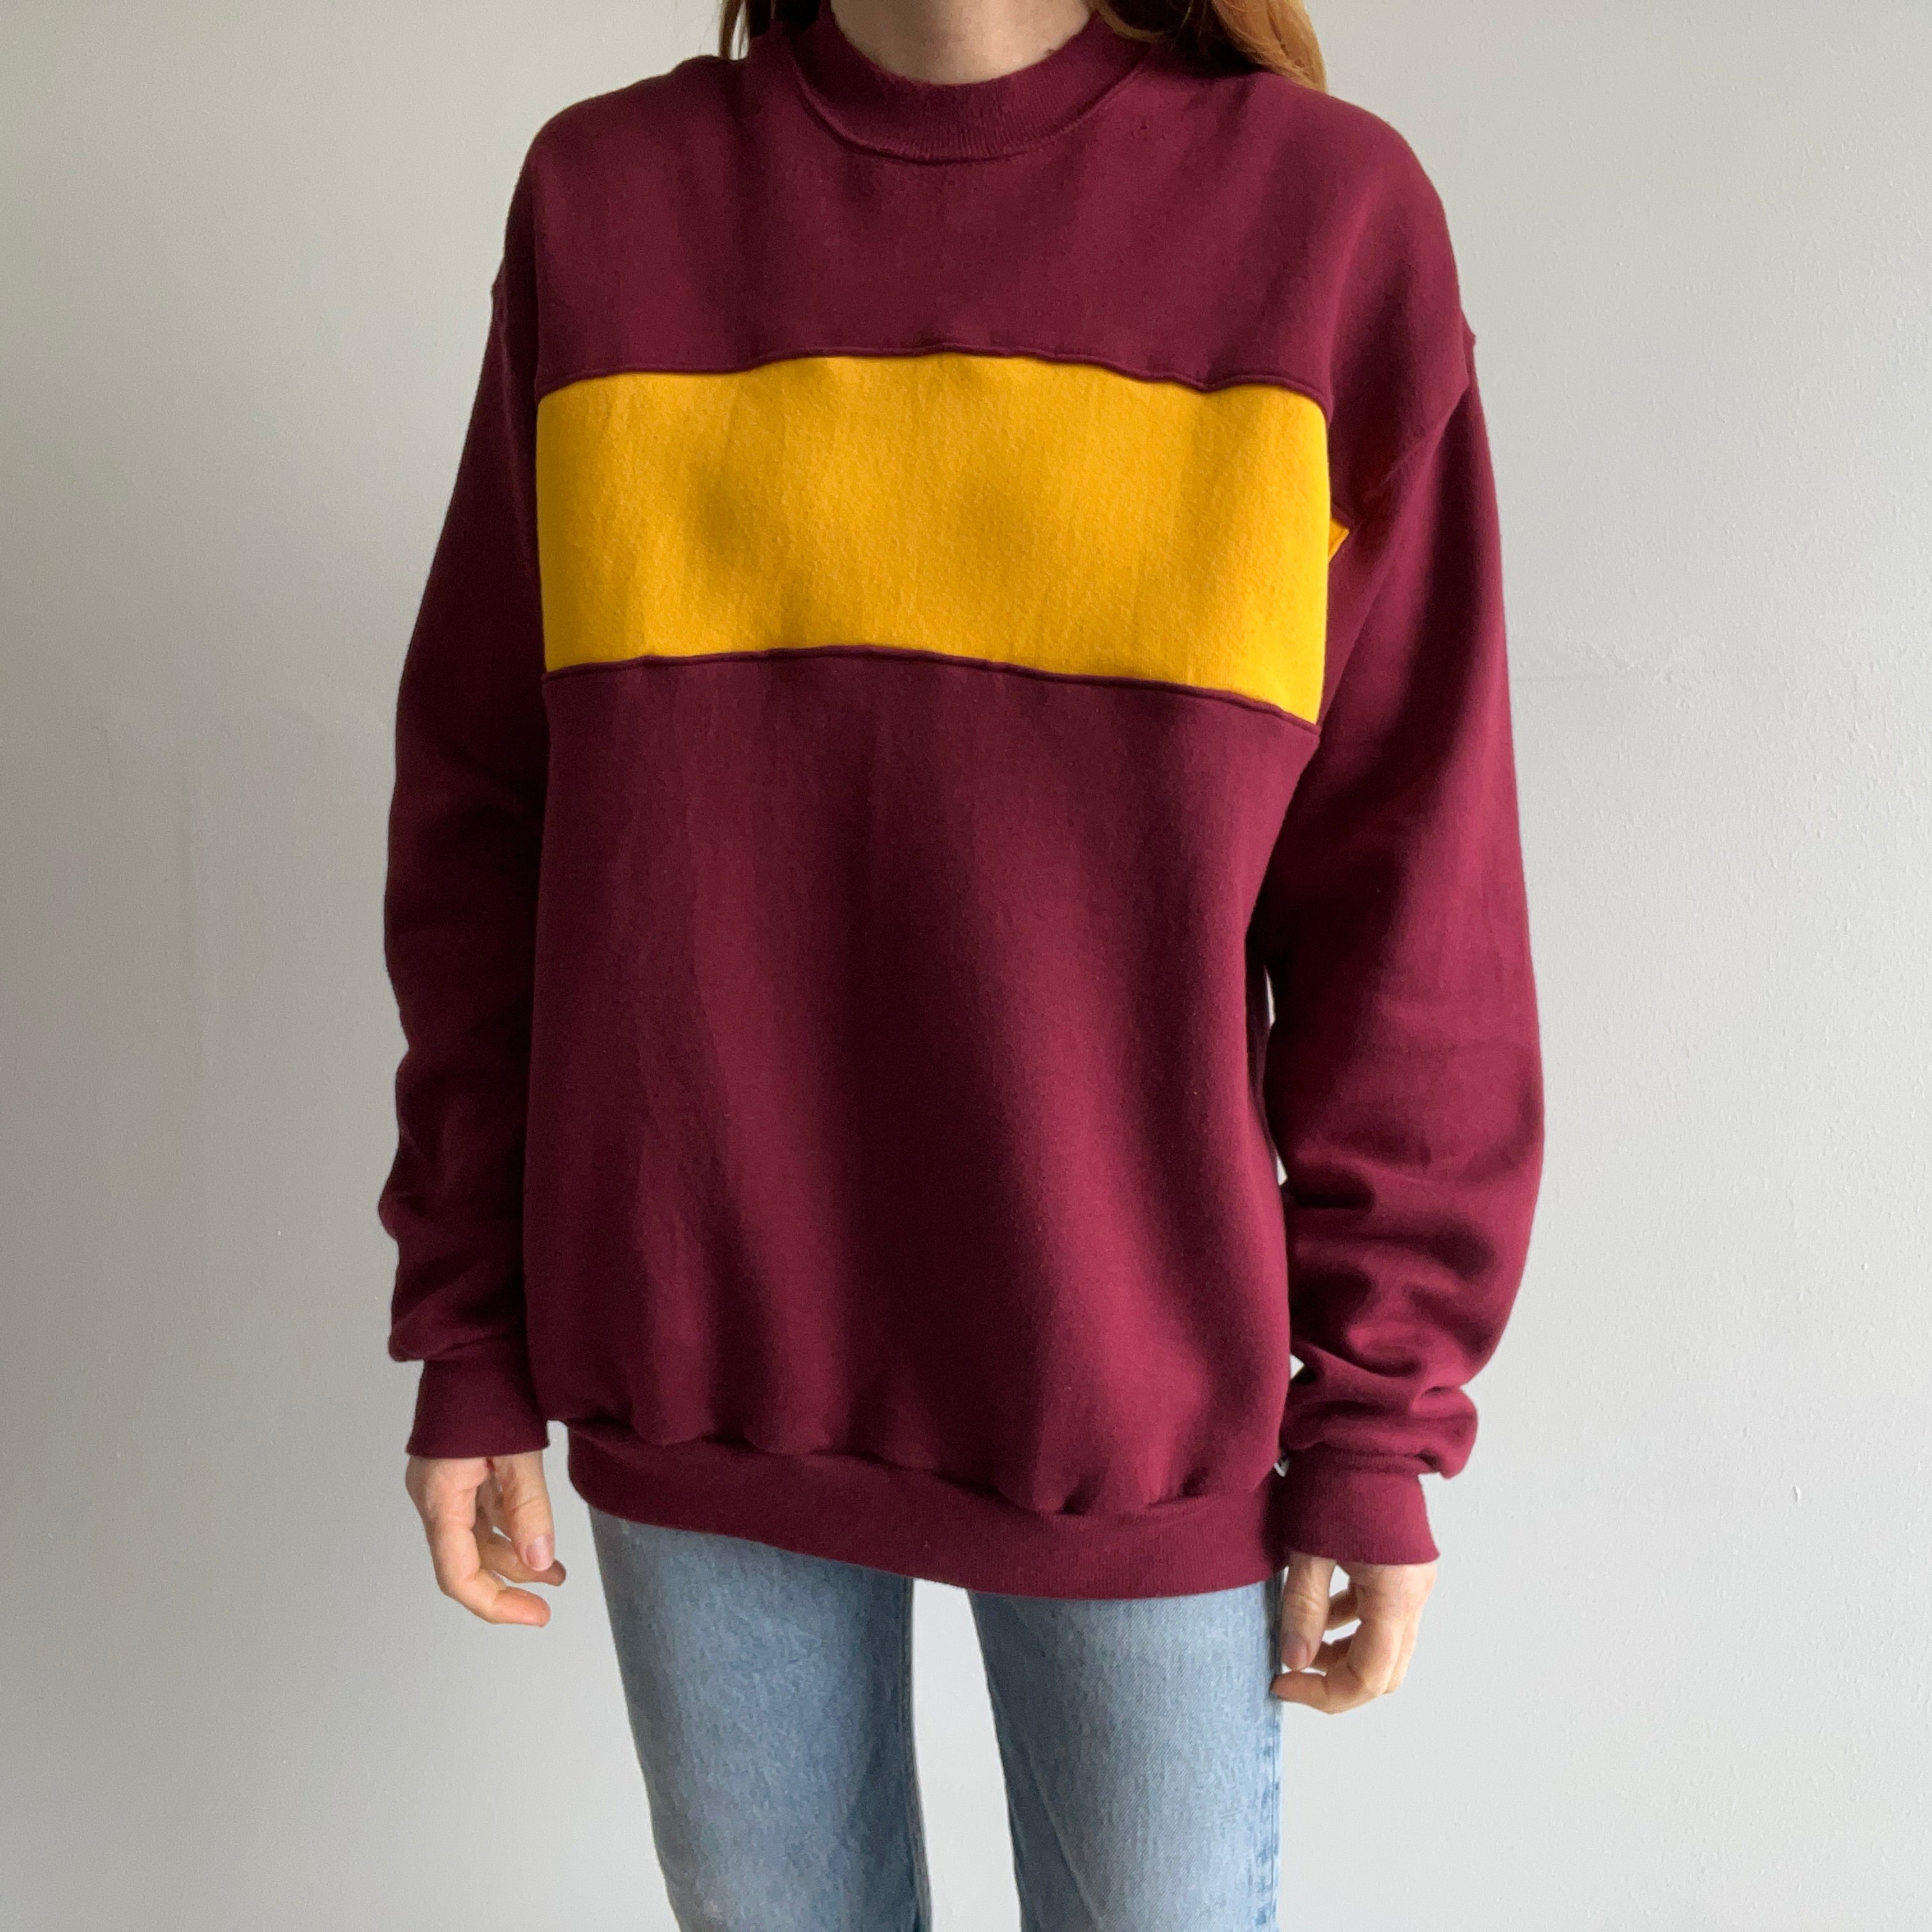 1980s Barely Worn Super Cozy Color Block Sweatshirt by Russell